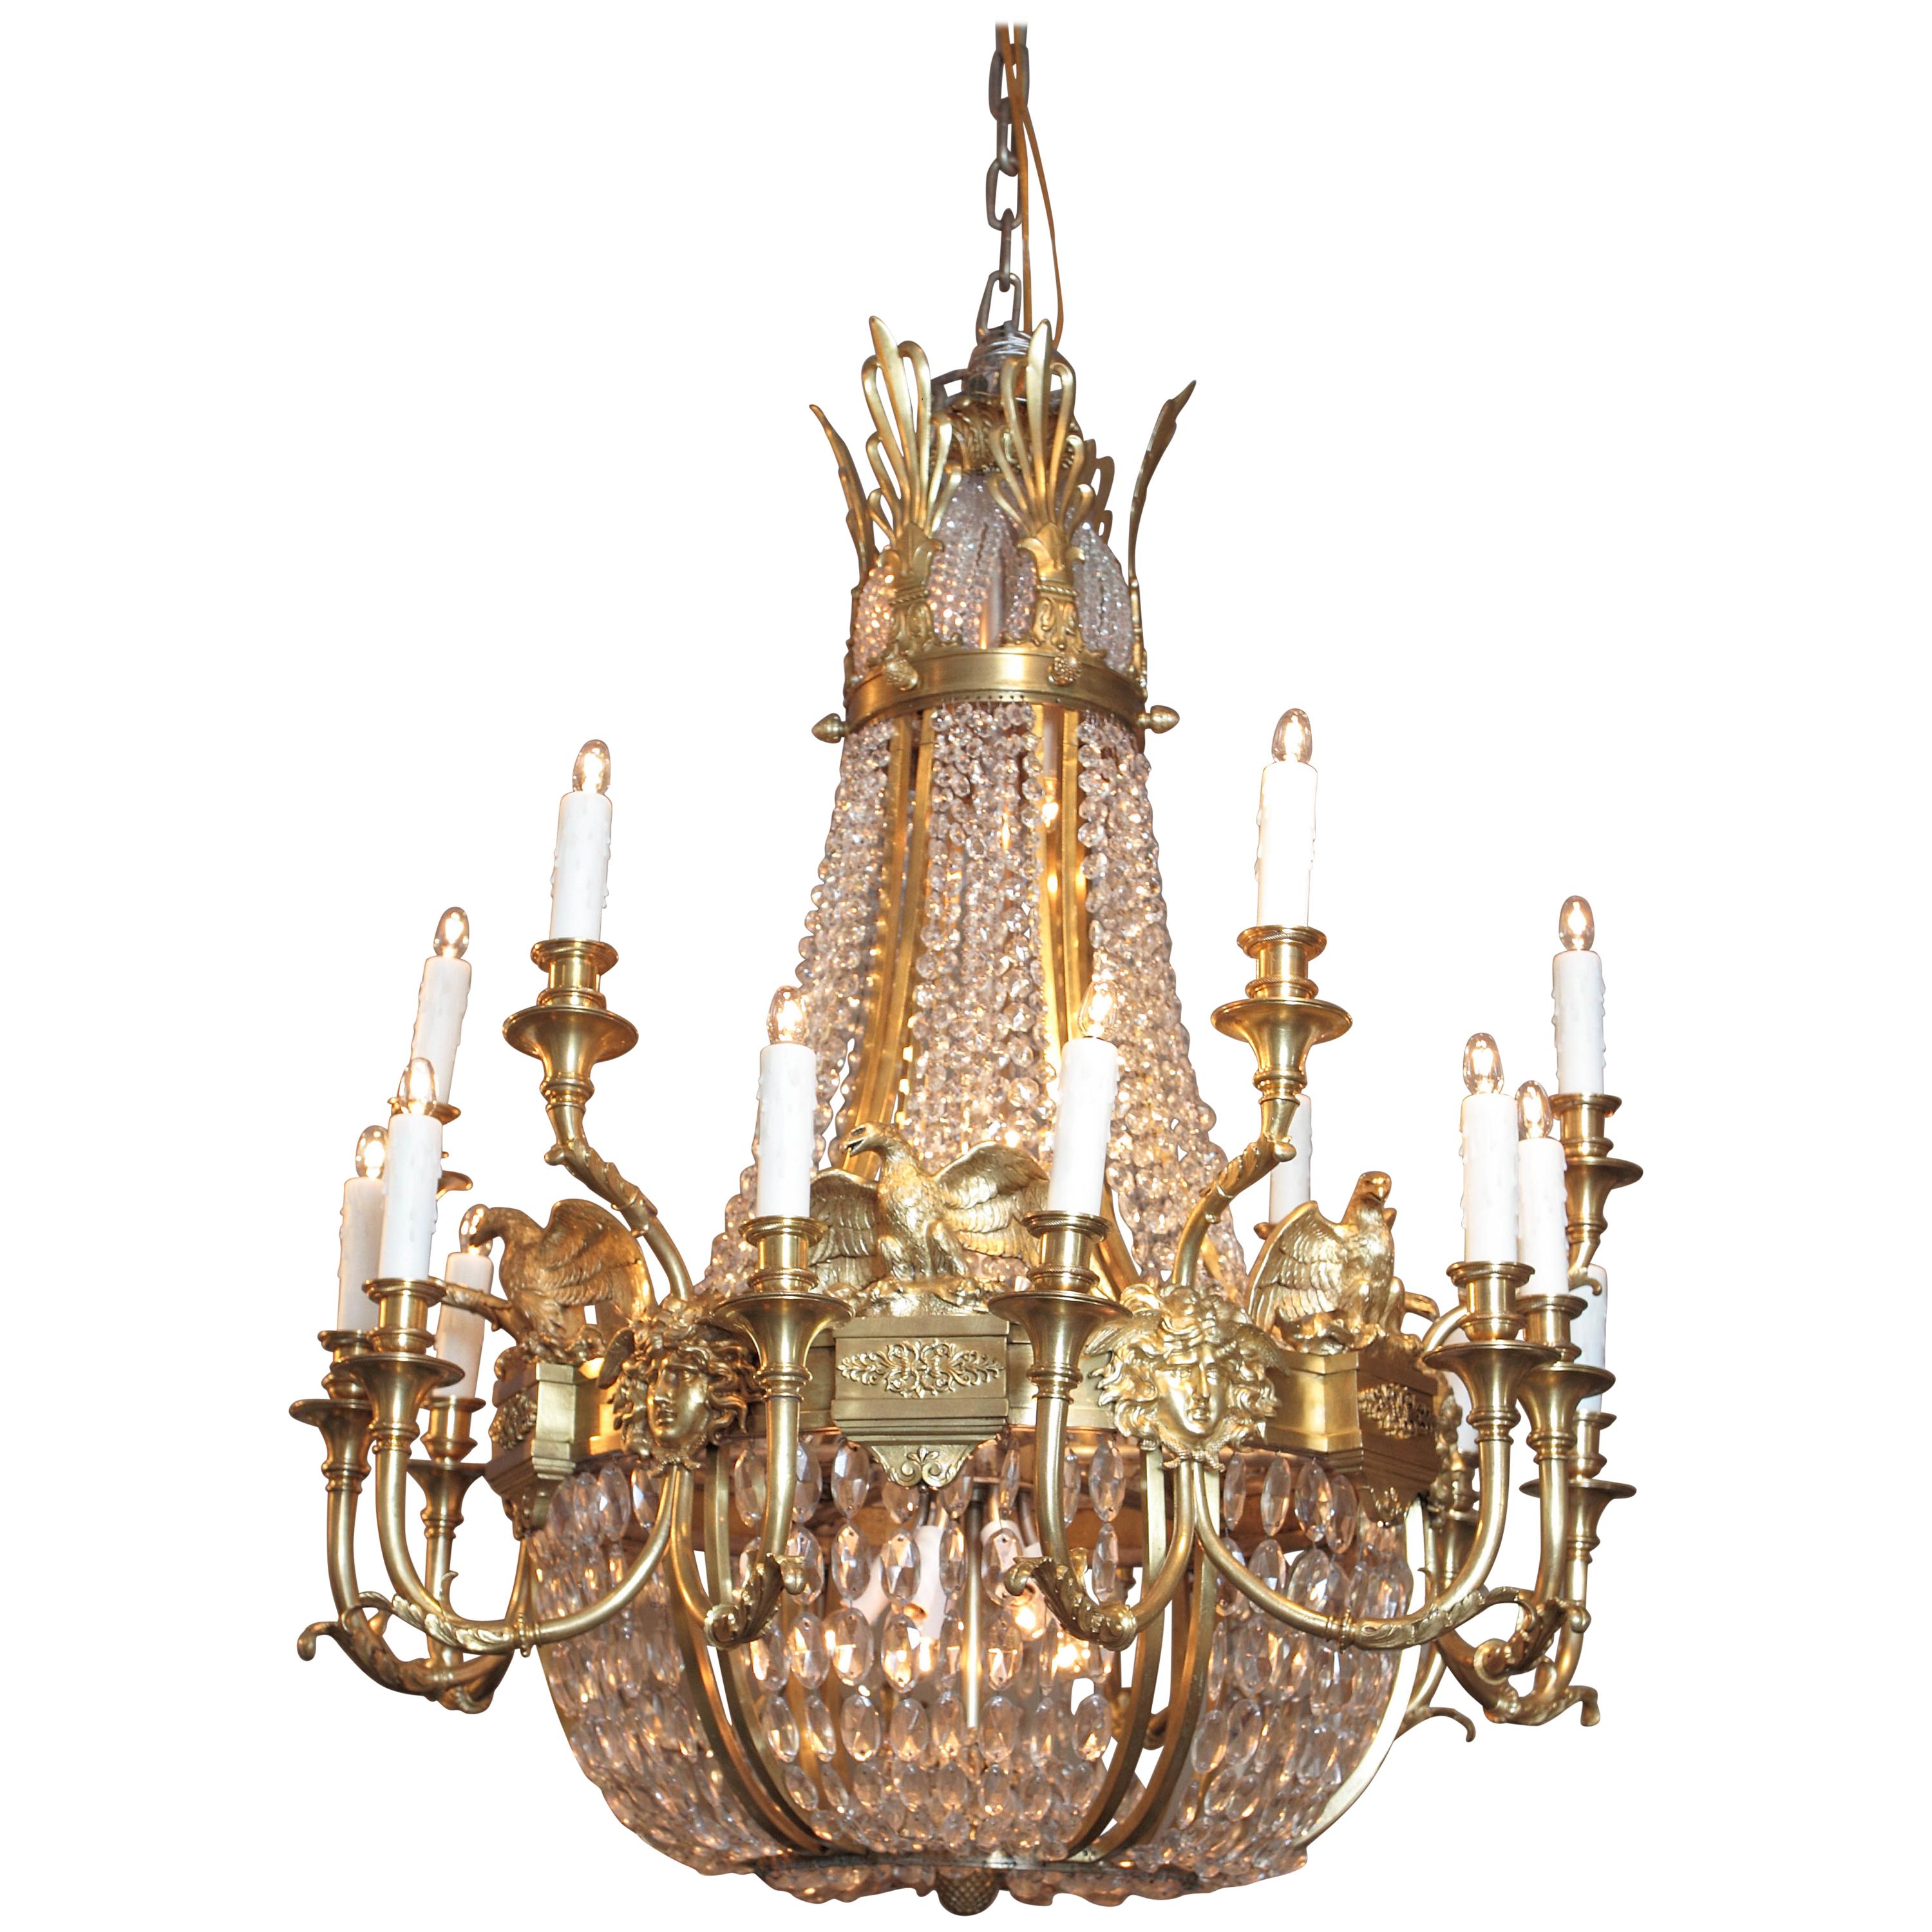 Important late 19th c American Empire Cut Crystal and Bronze Doré Chandelier